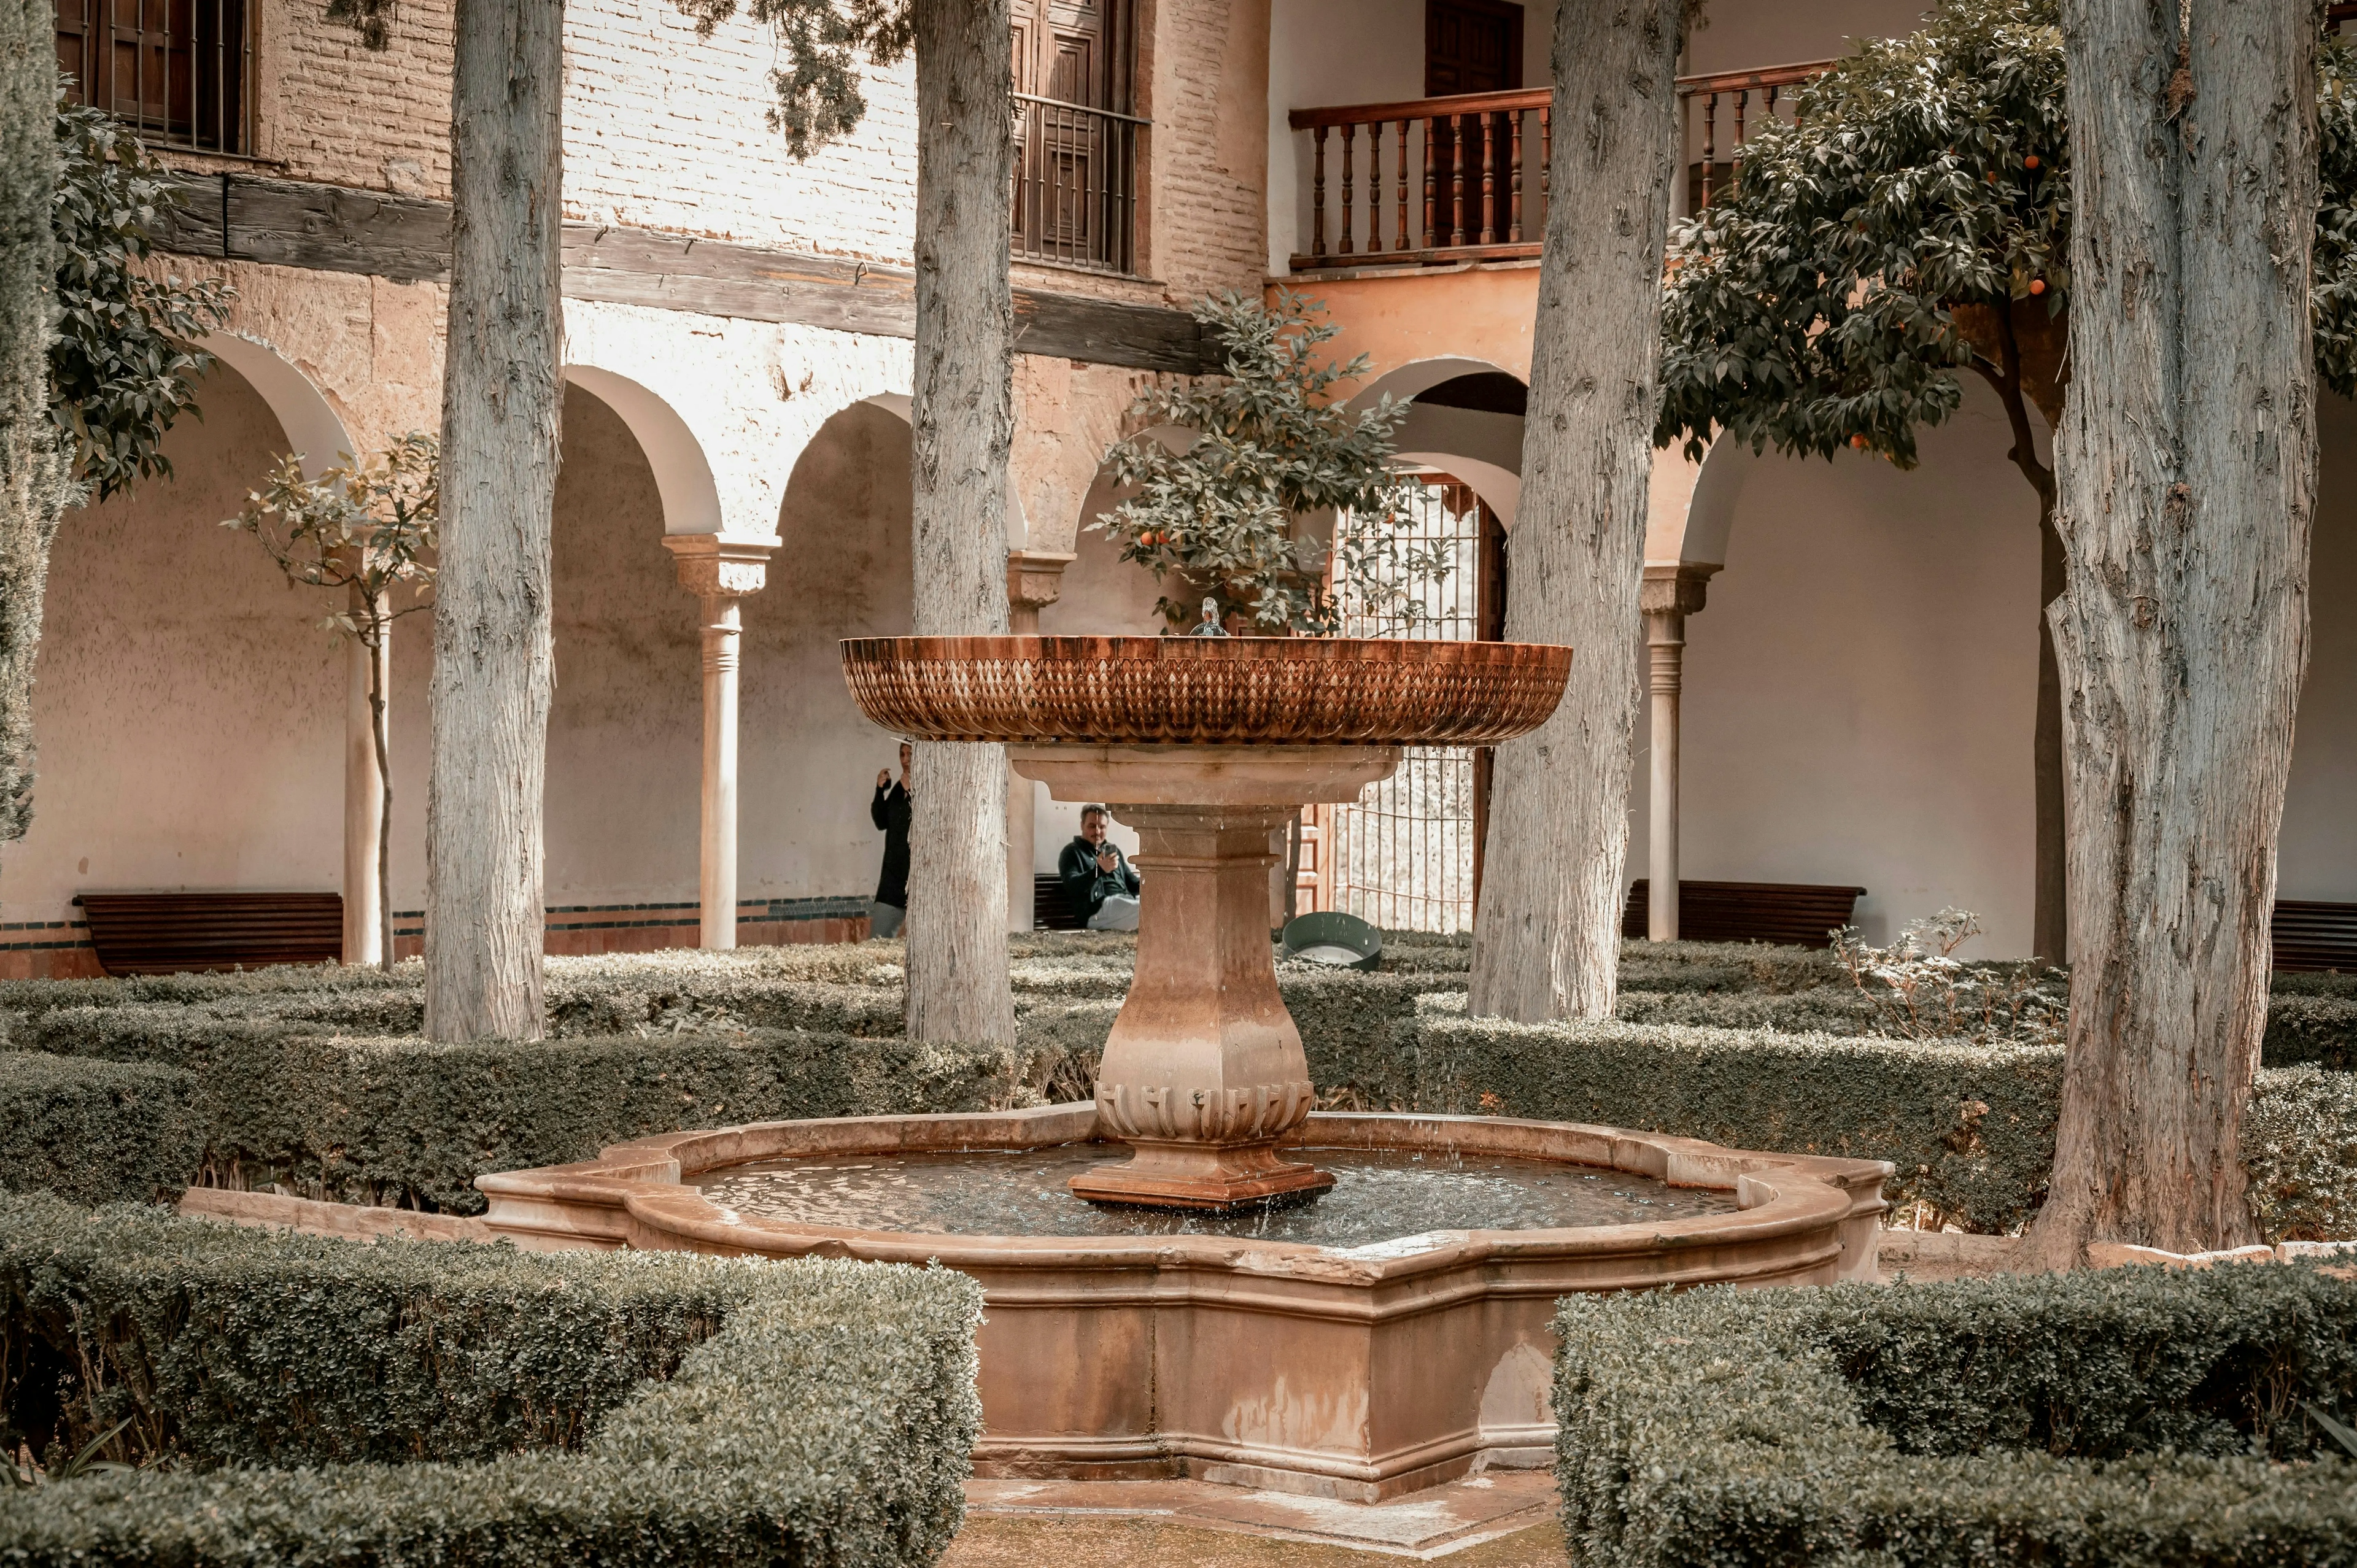 Exploring The Alhambra